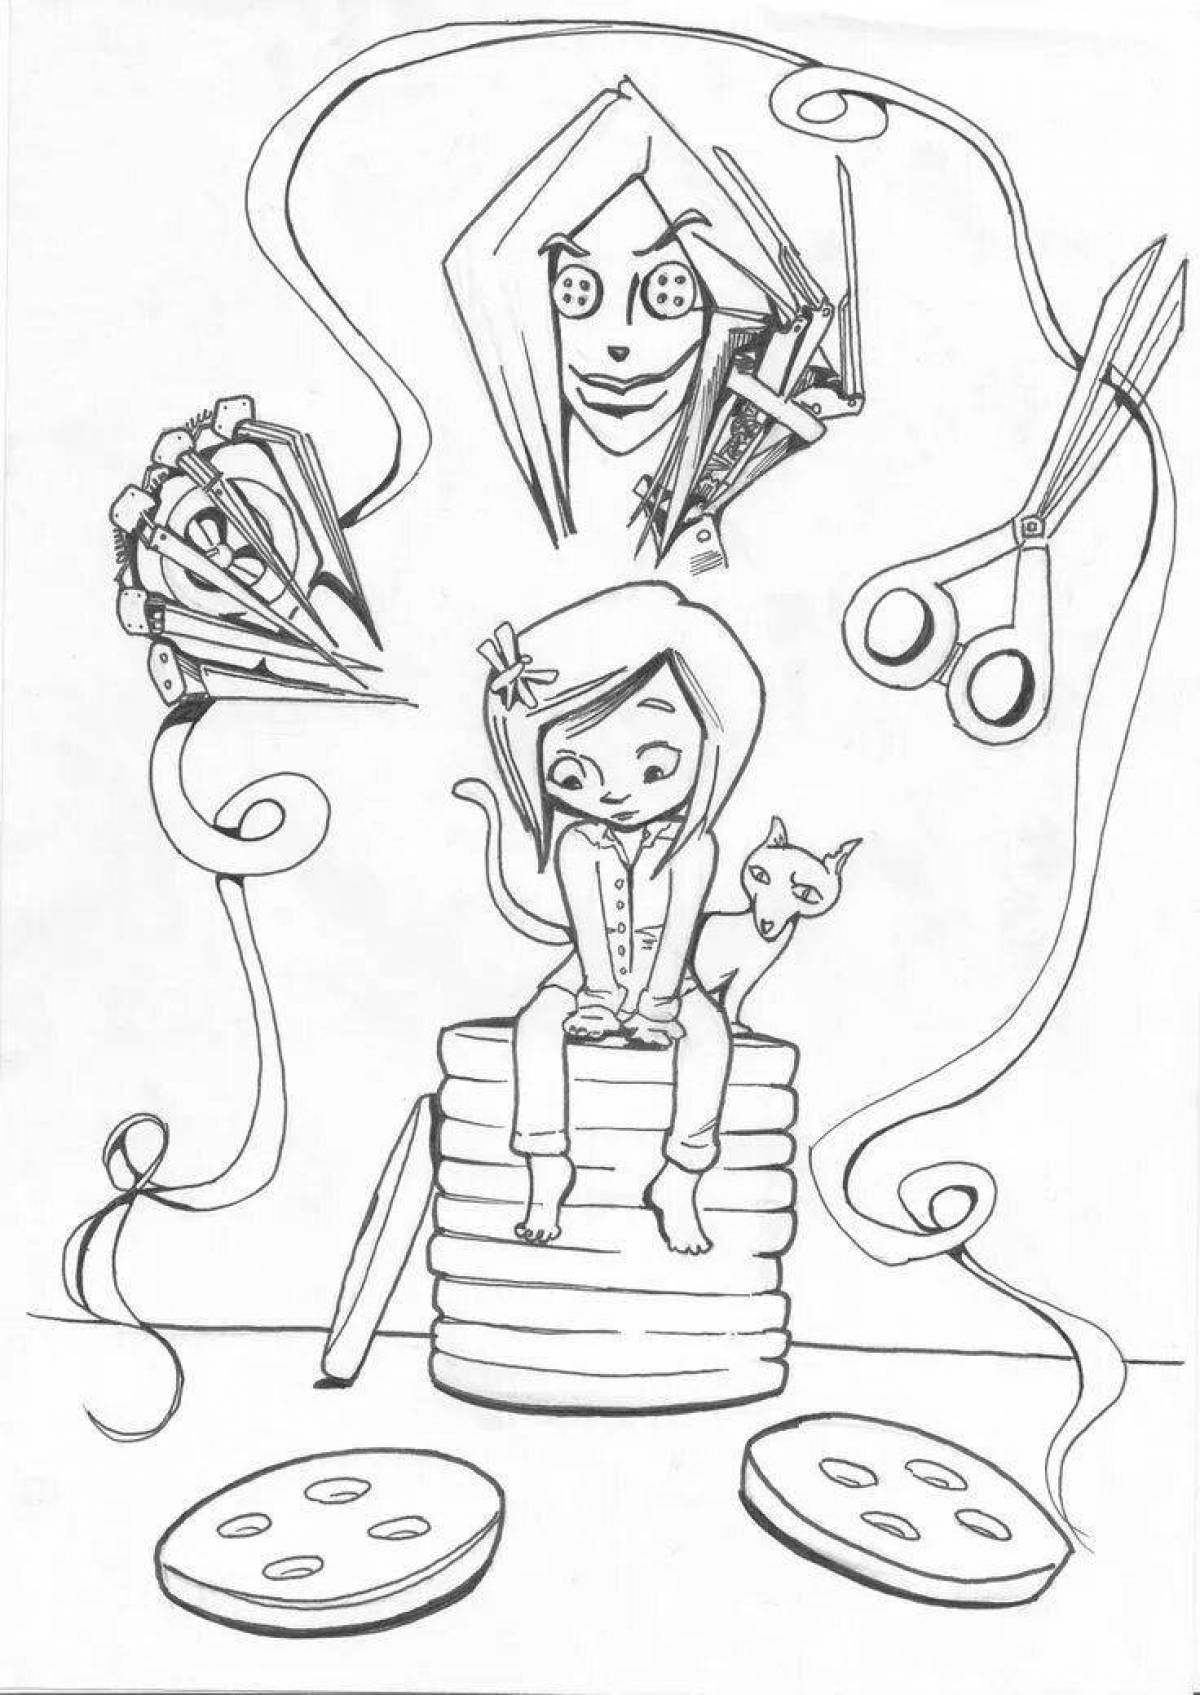 Animated Coraline Coloring Page